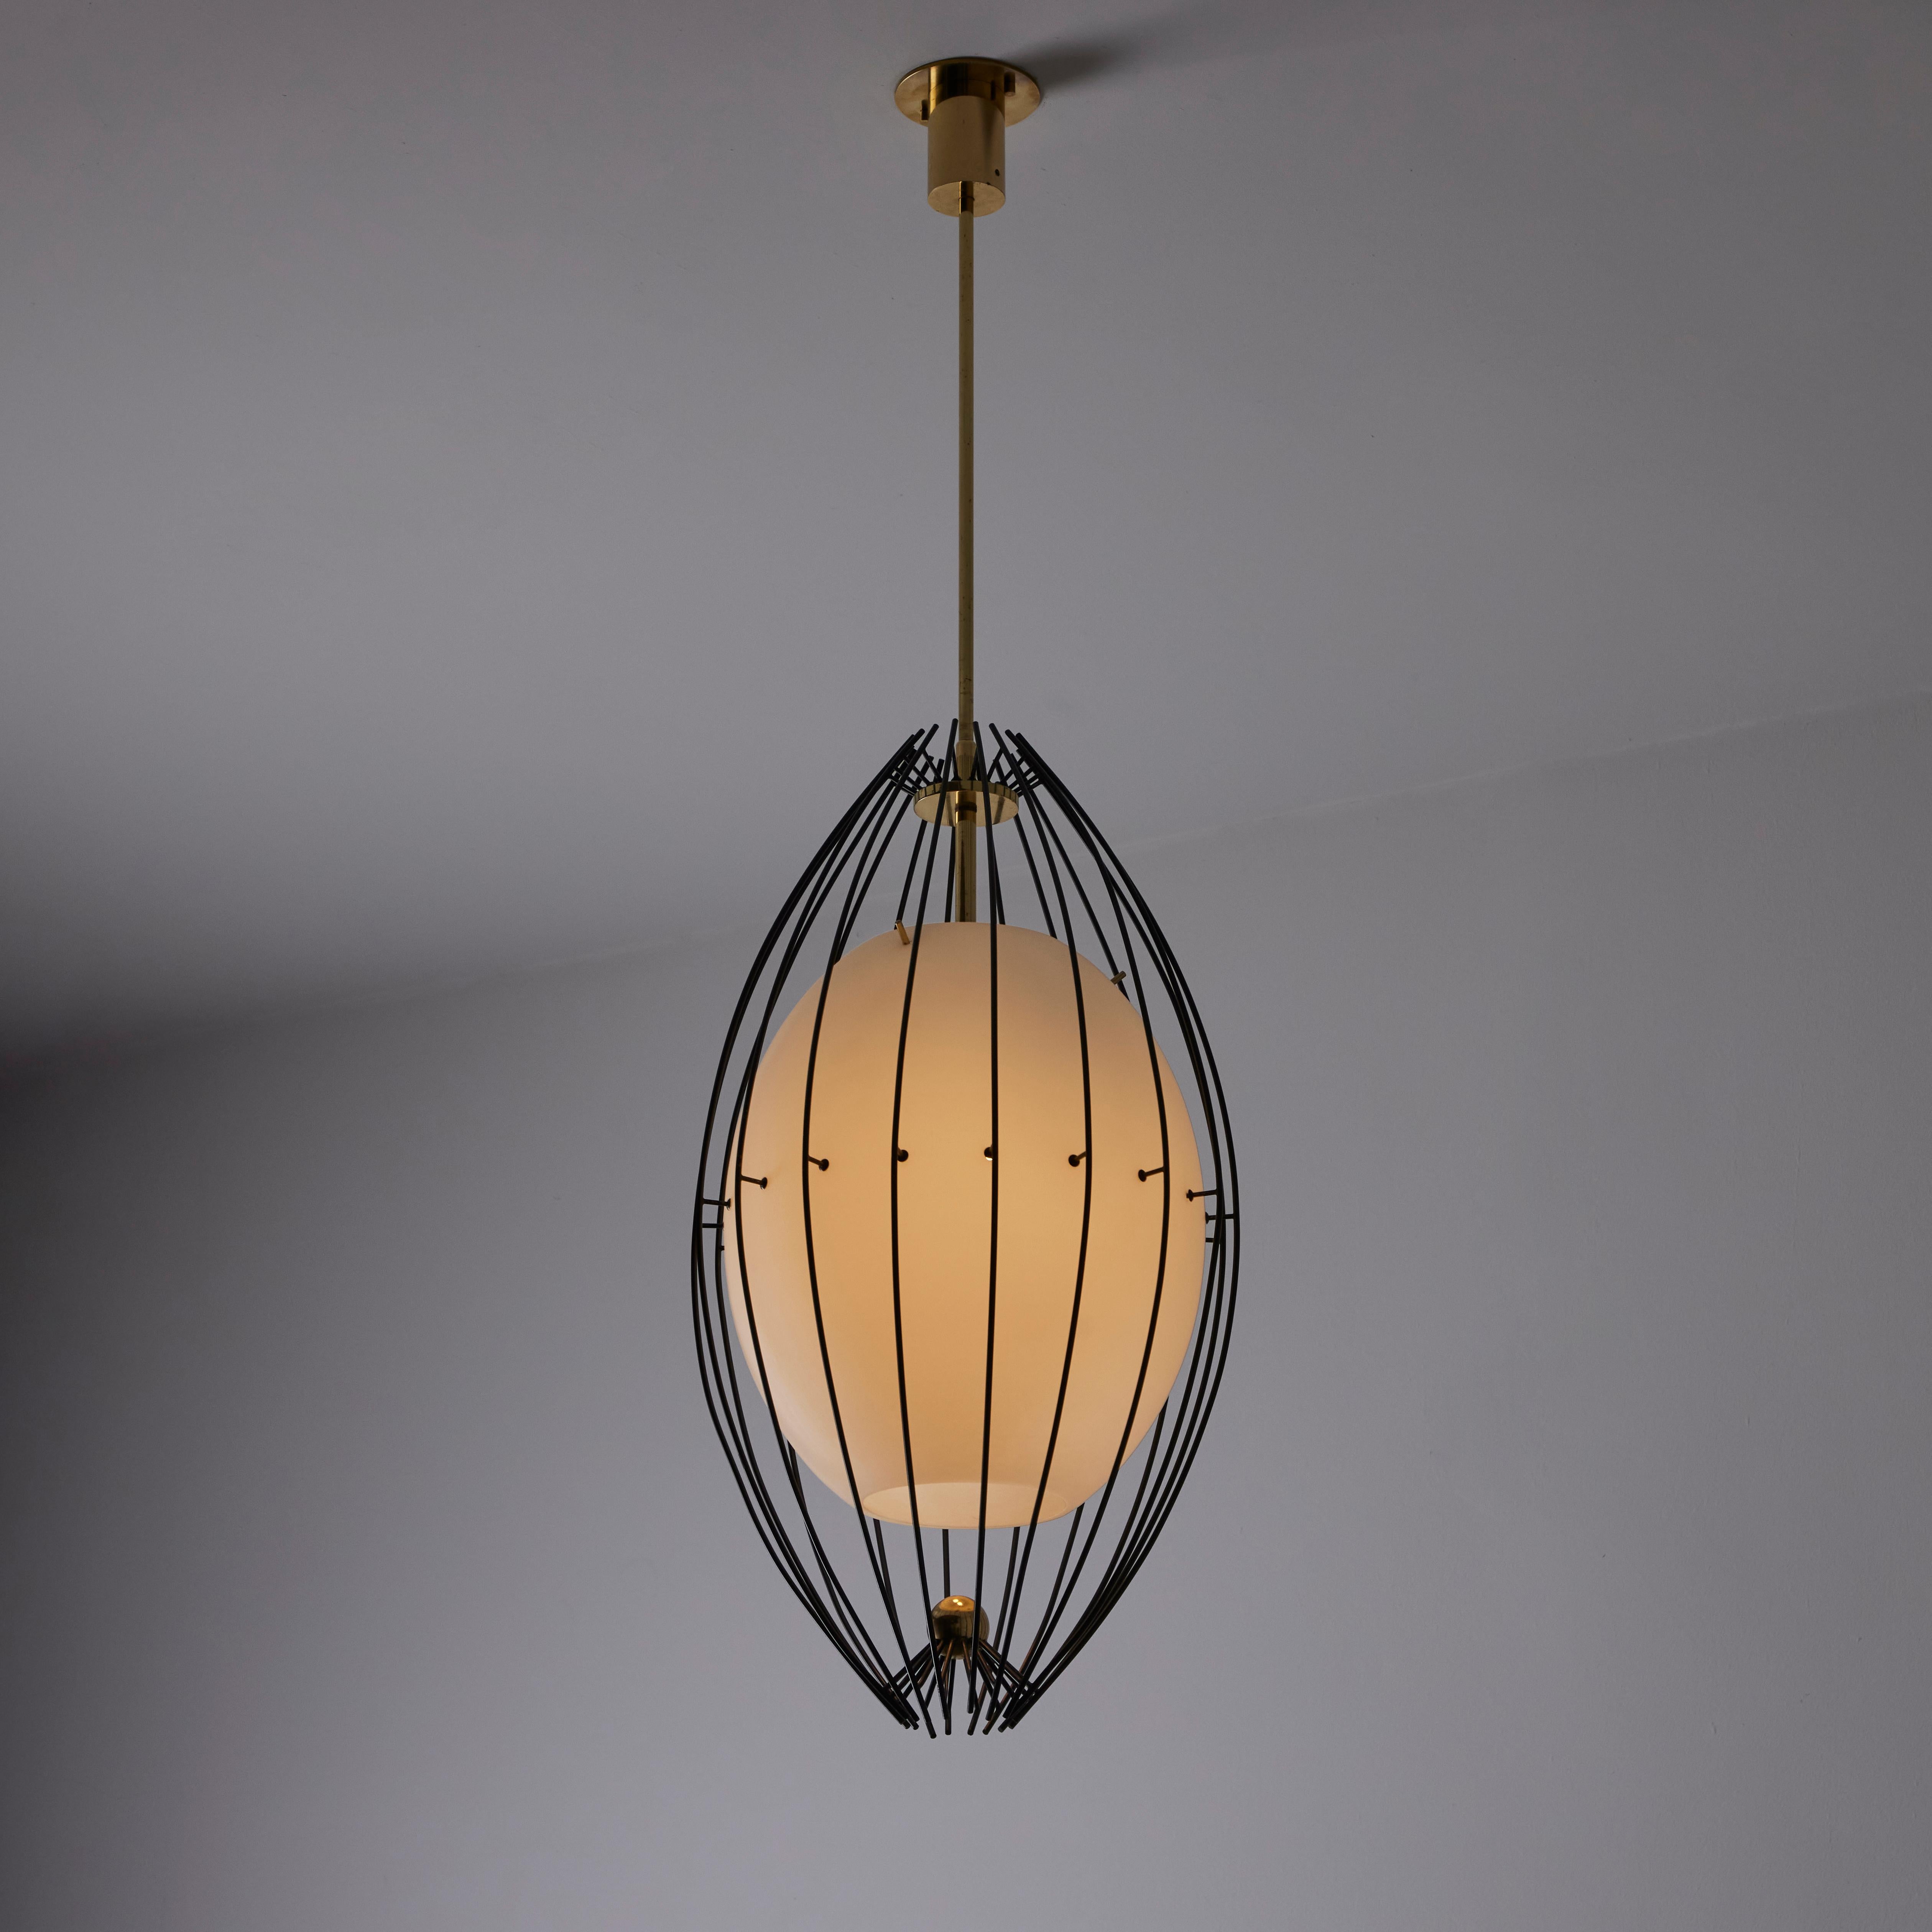 Rare ceiling light by Angelo Lelii for Arredoluce. Designed and manufactured in Italy, in 1958. An oval glass orb is caged by enameled rods throughout the body of this pendant. The rods are black enameled and there are polished brass details at the